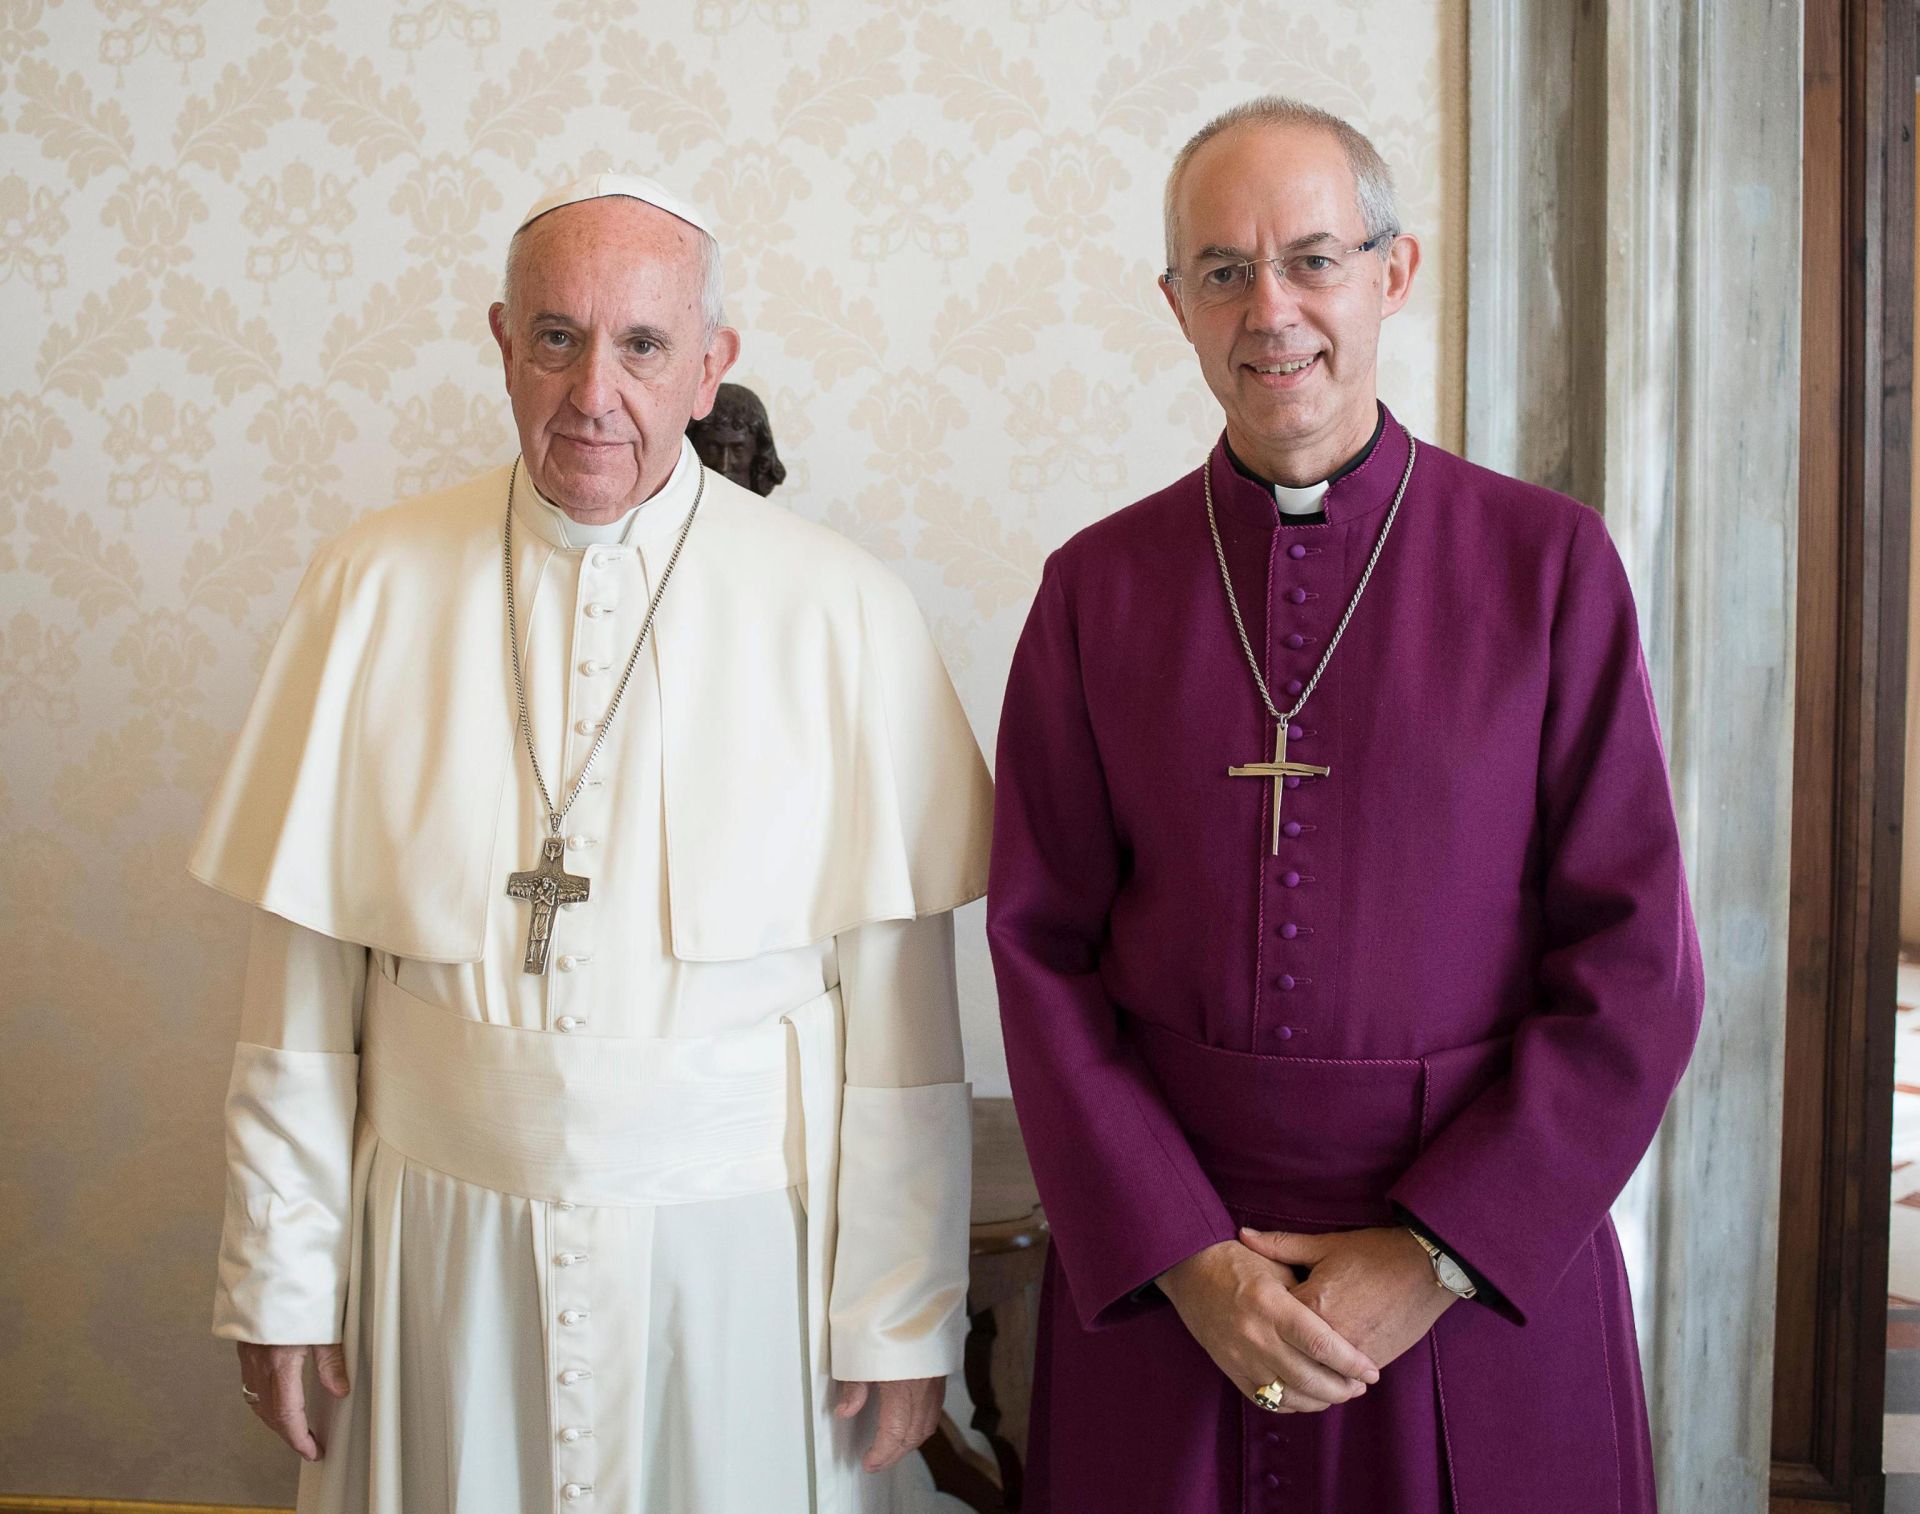 epa05572948 A handout picture provided by Vatican newspaper L'Osservatore Romano shows Pope Francis (L) during the meeting with the head of the Anglican Church, Archbishop of Canterbury Justin Welby (R), at the Vatican, 06 October 2016. Francis stressed the importance of Christian unity and urged the Anglican Church to help 'bring love to a world thirsty for peace'.  EPA/OSSERVATORE ROMANO / HANDOUT  HANDOUT EDITORIAL USE ONLY/NO SALES